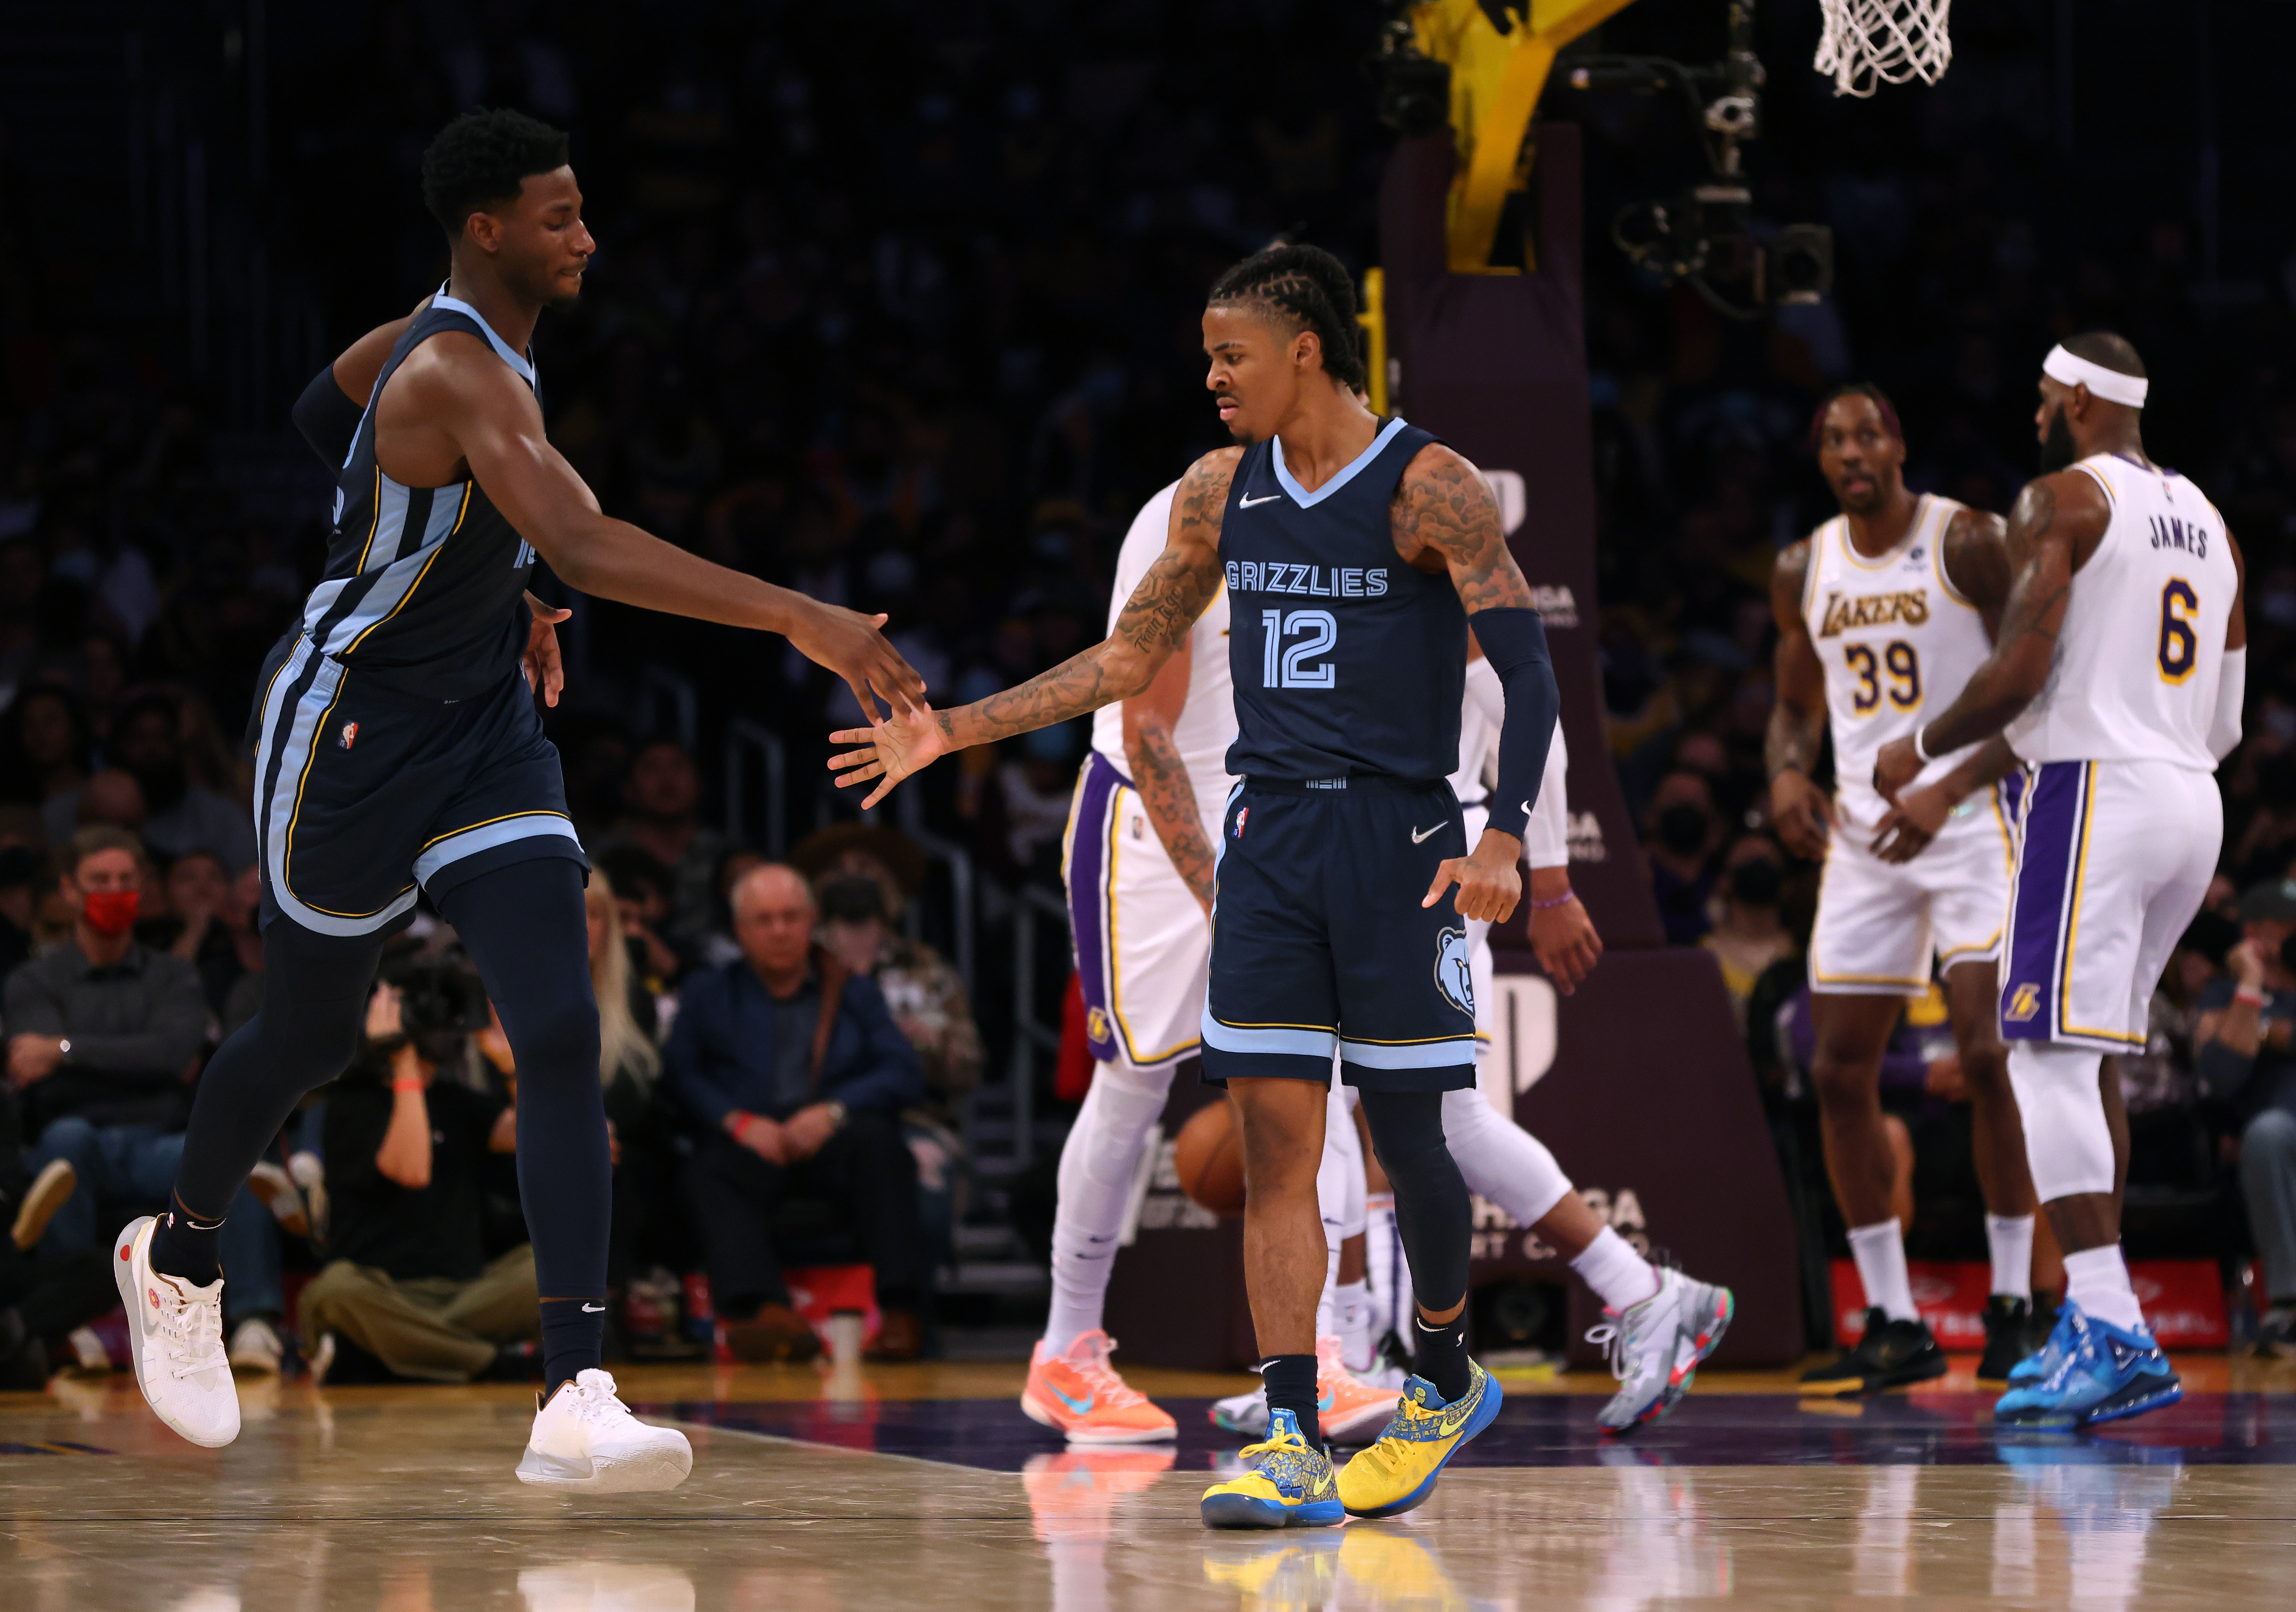 Grizzlies star Ja Morant high-fives Jaren Jackson Jr. during Sunday's game against the Lakers